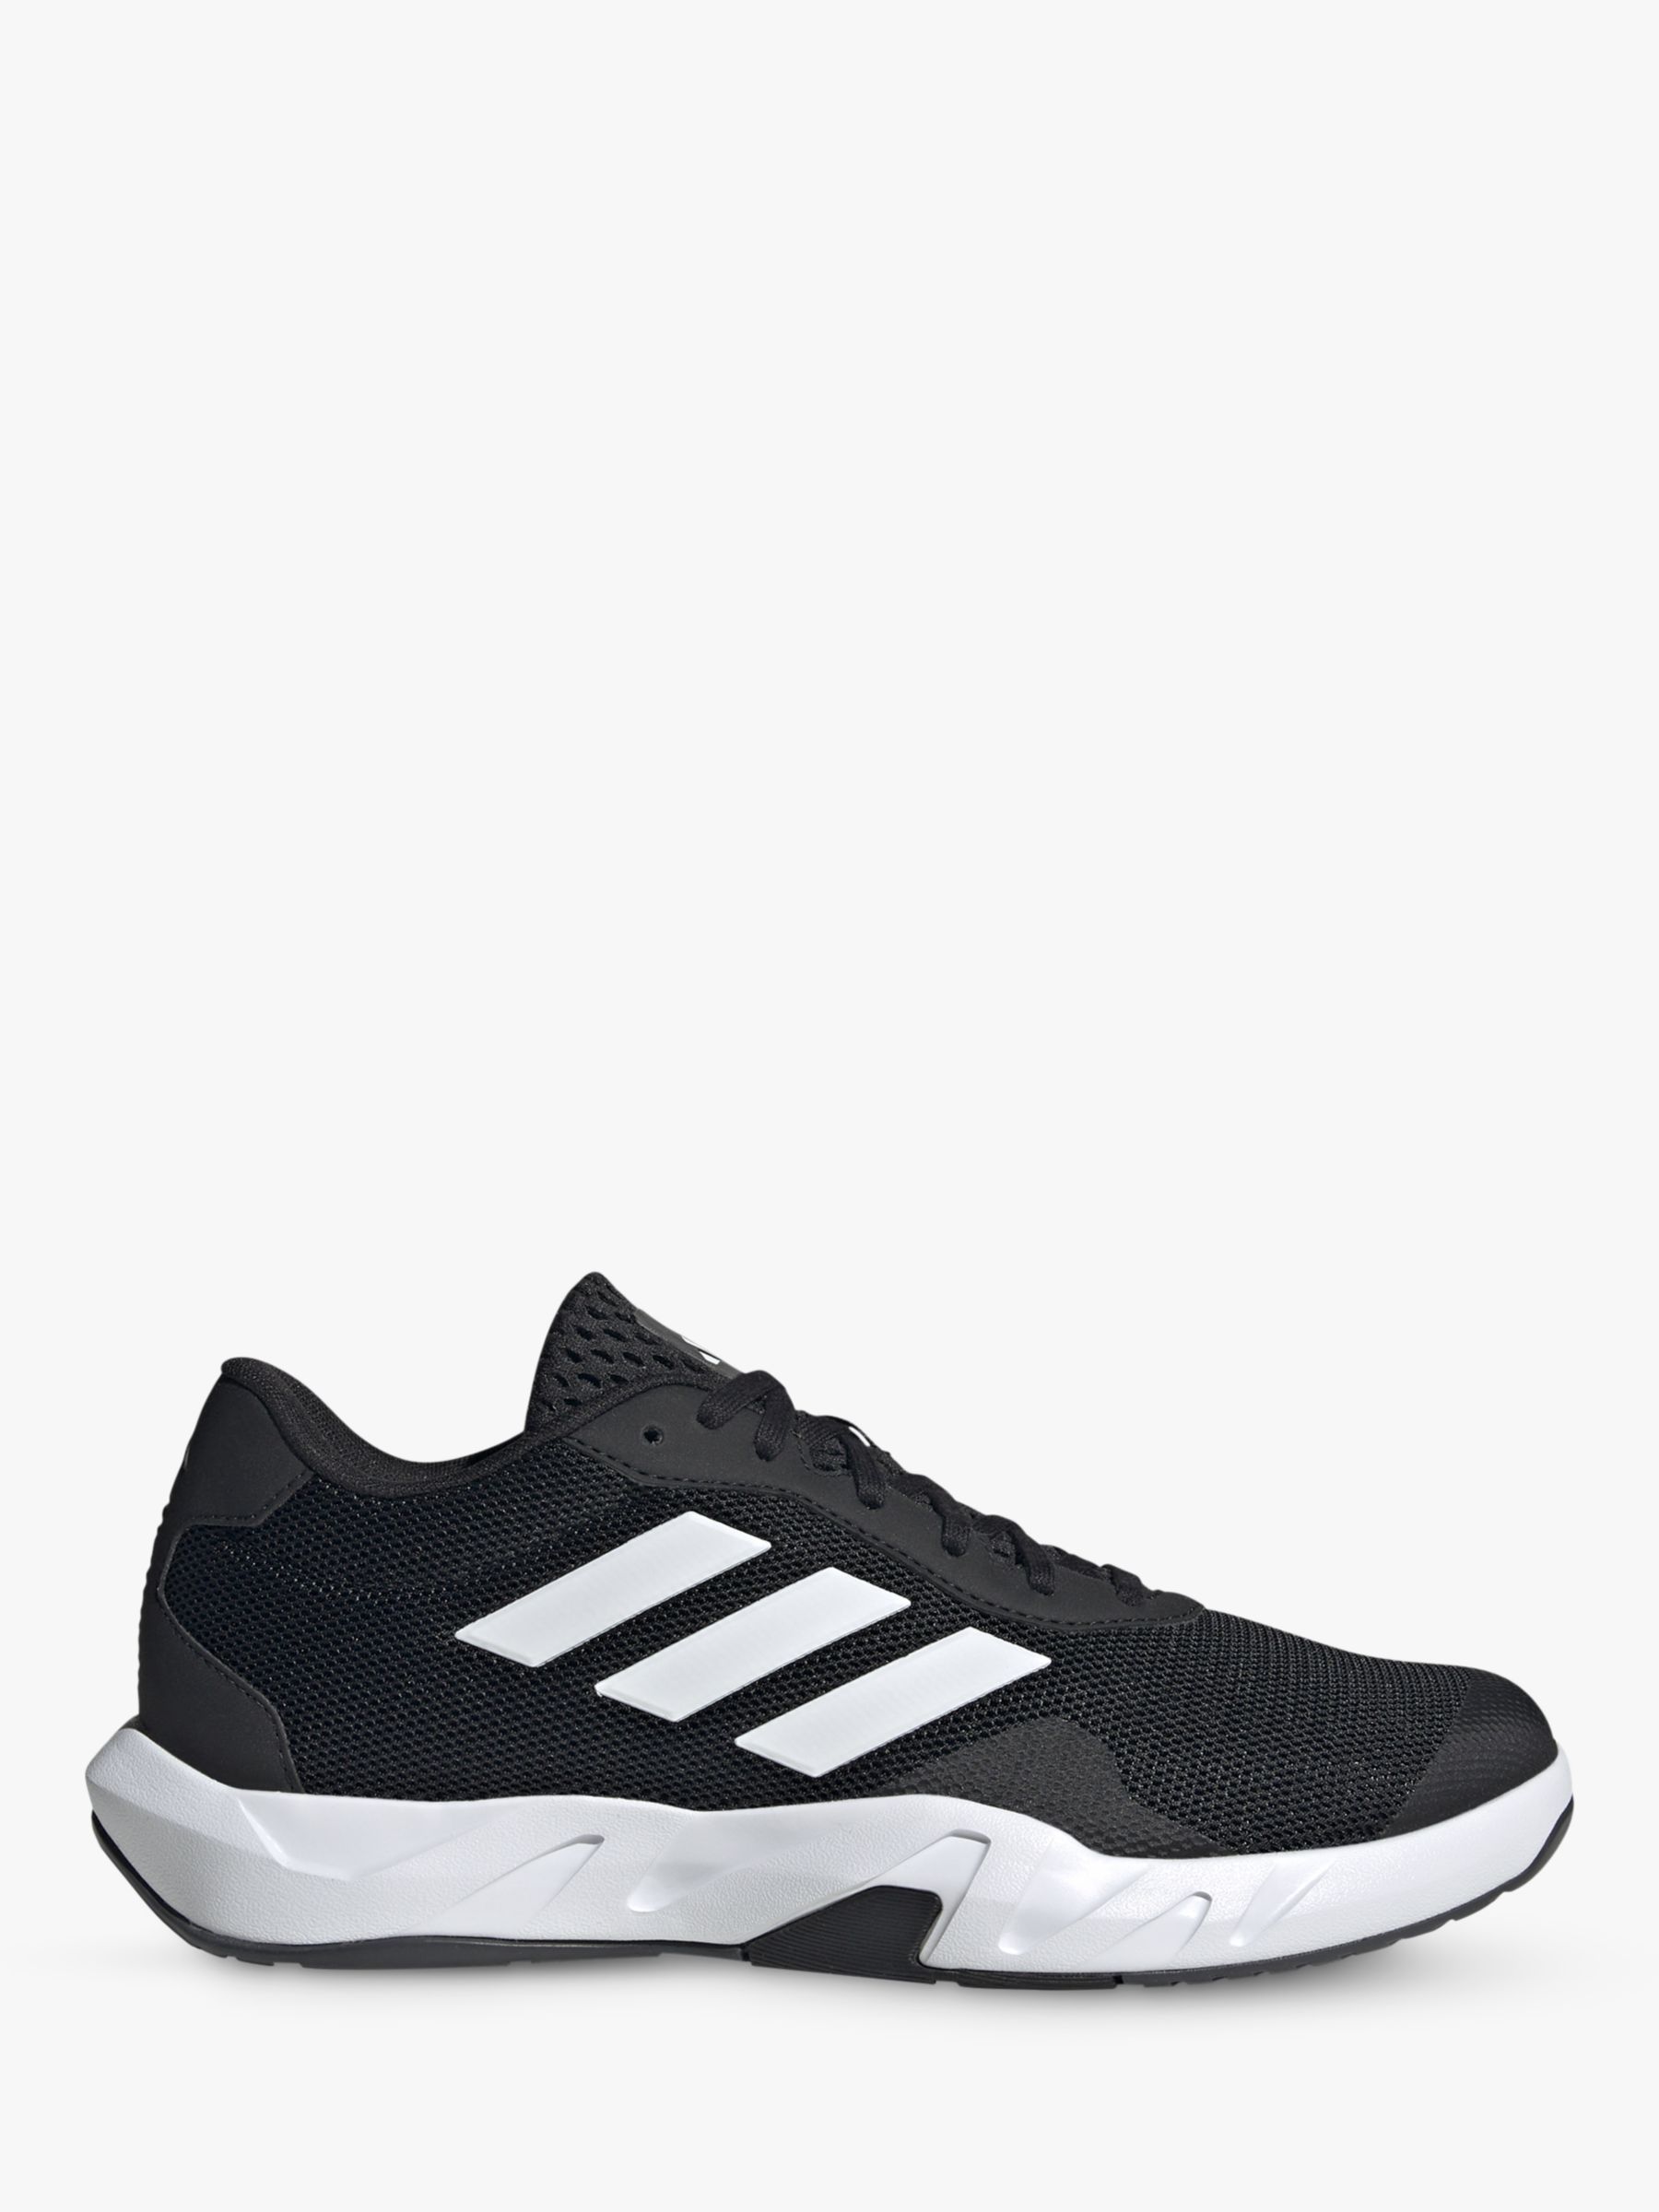 Buy adidas AMPLIMOVE Trainers,  Black/White Online at johnlewis.com